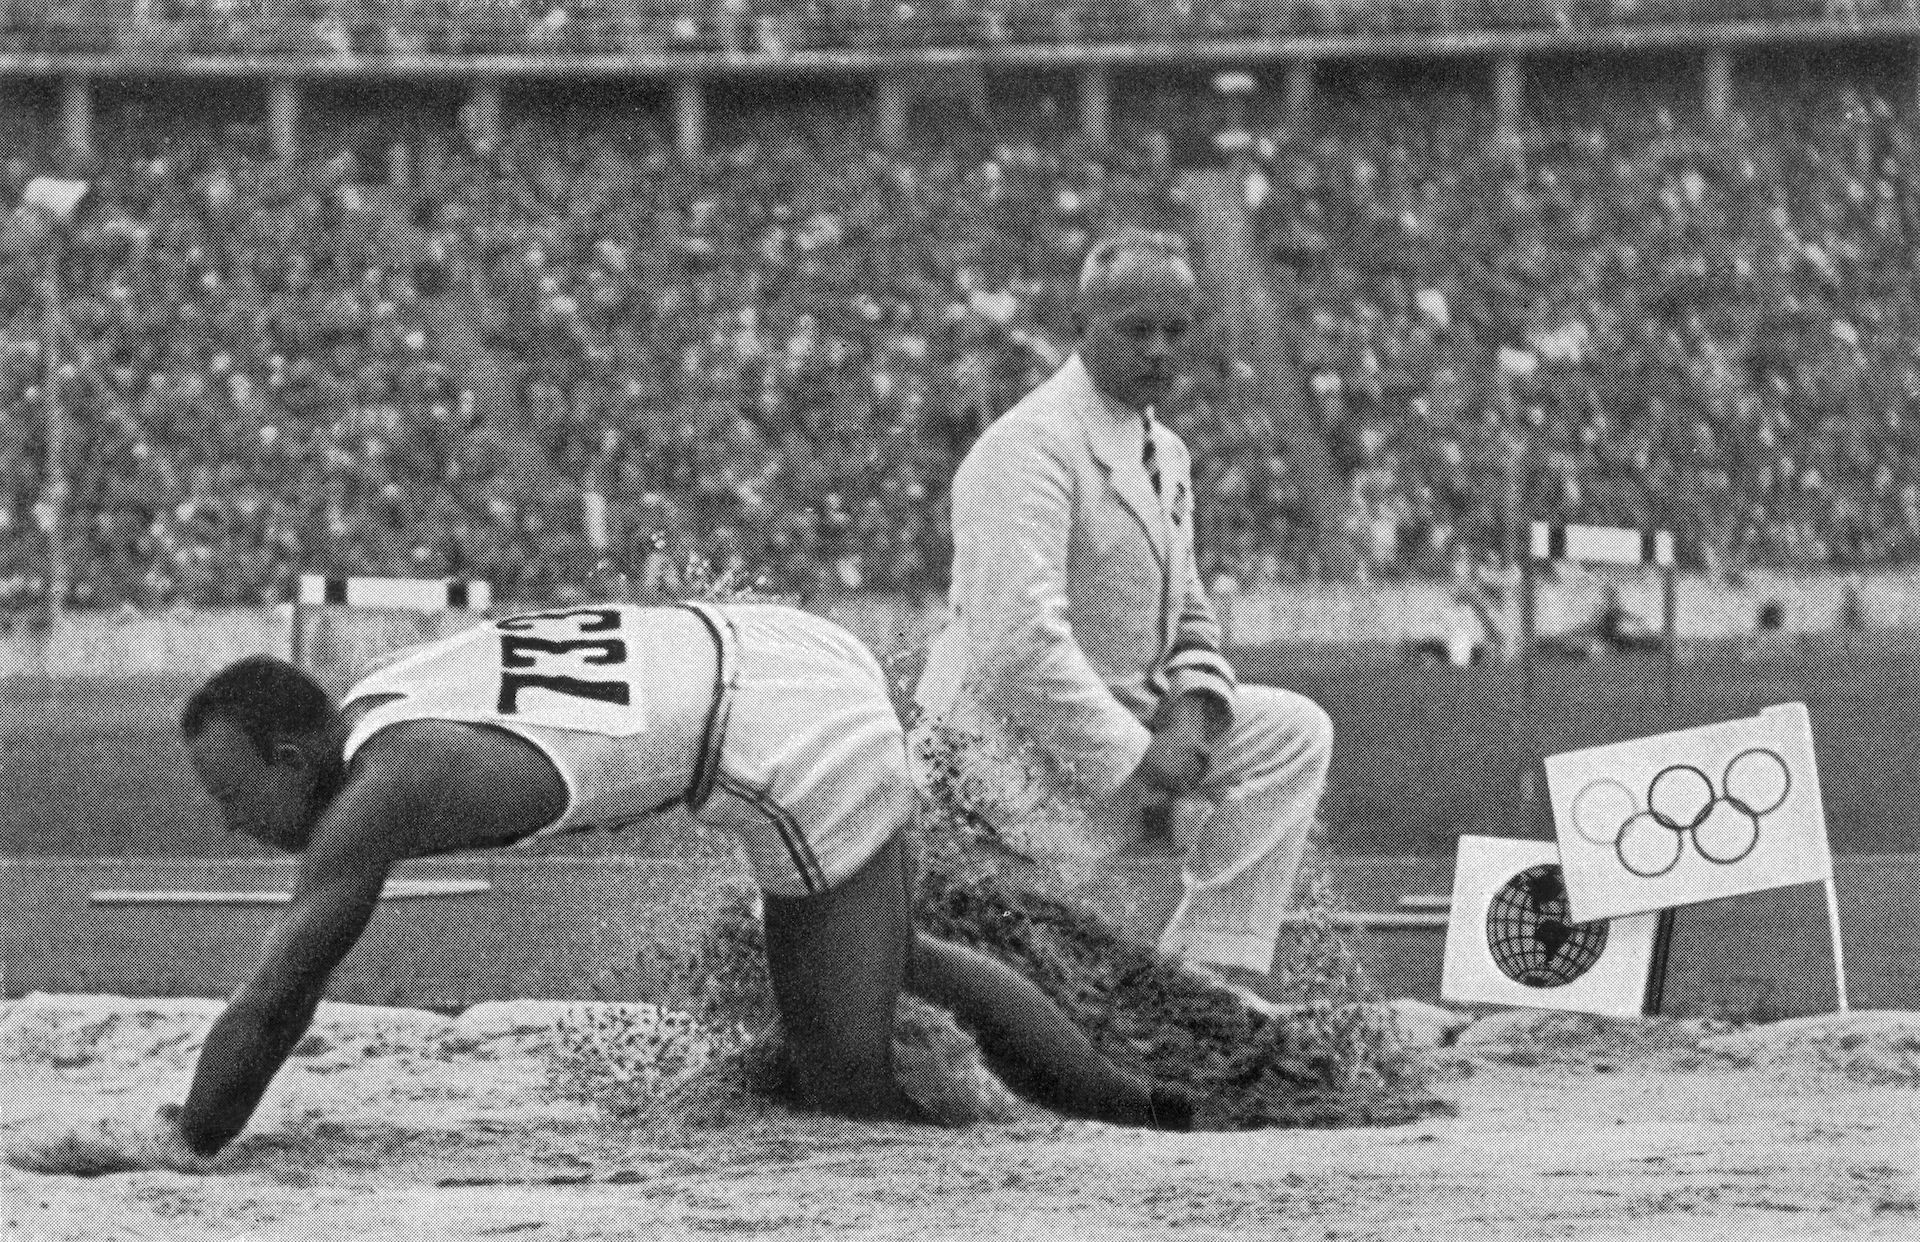  Jesse Owens competes in the long jump at the 1936 Berlin Olympics. GETTY IMAGES